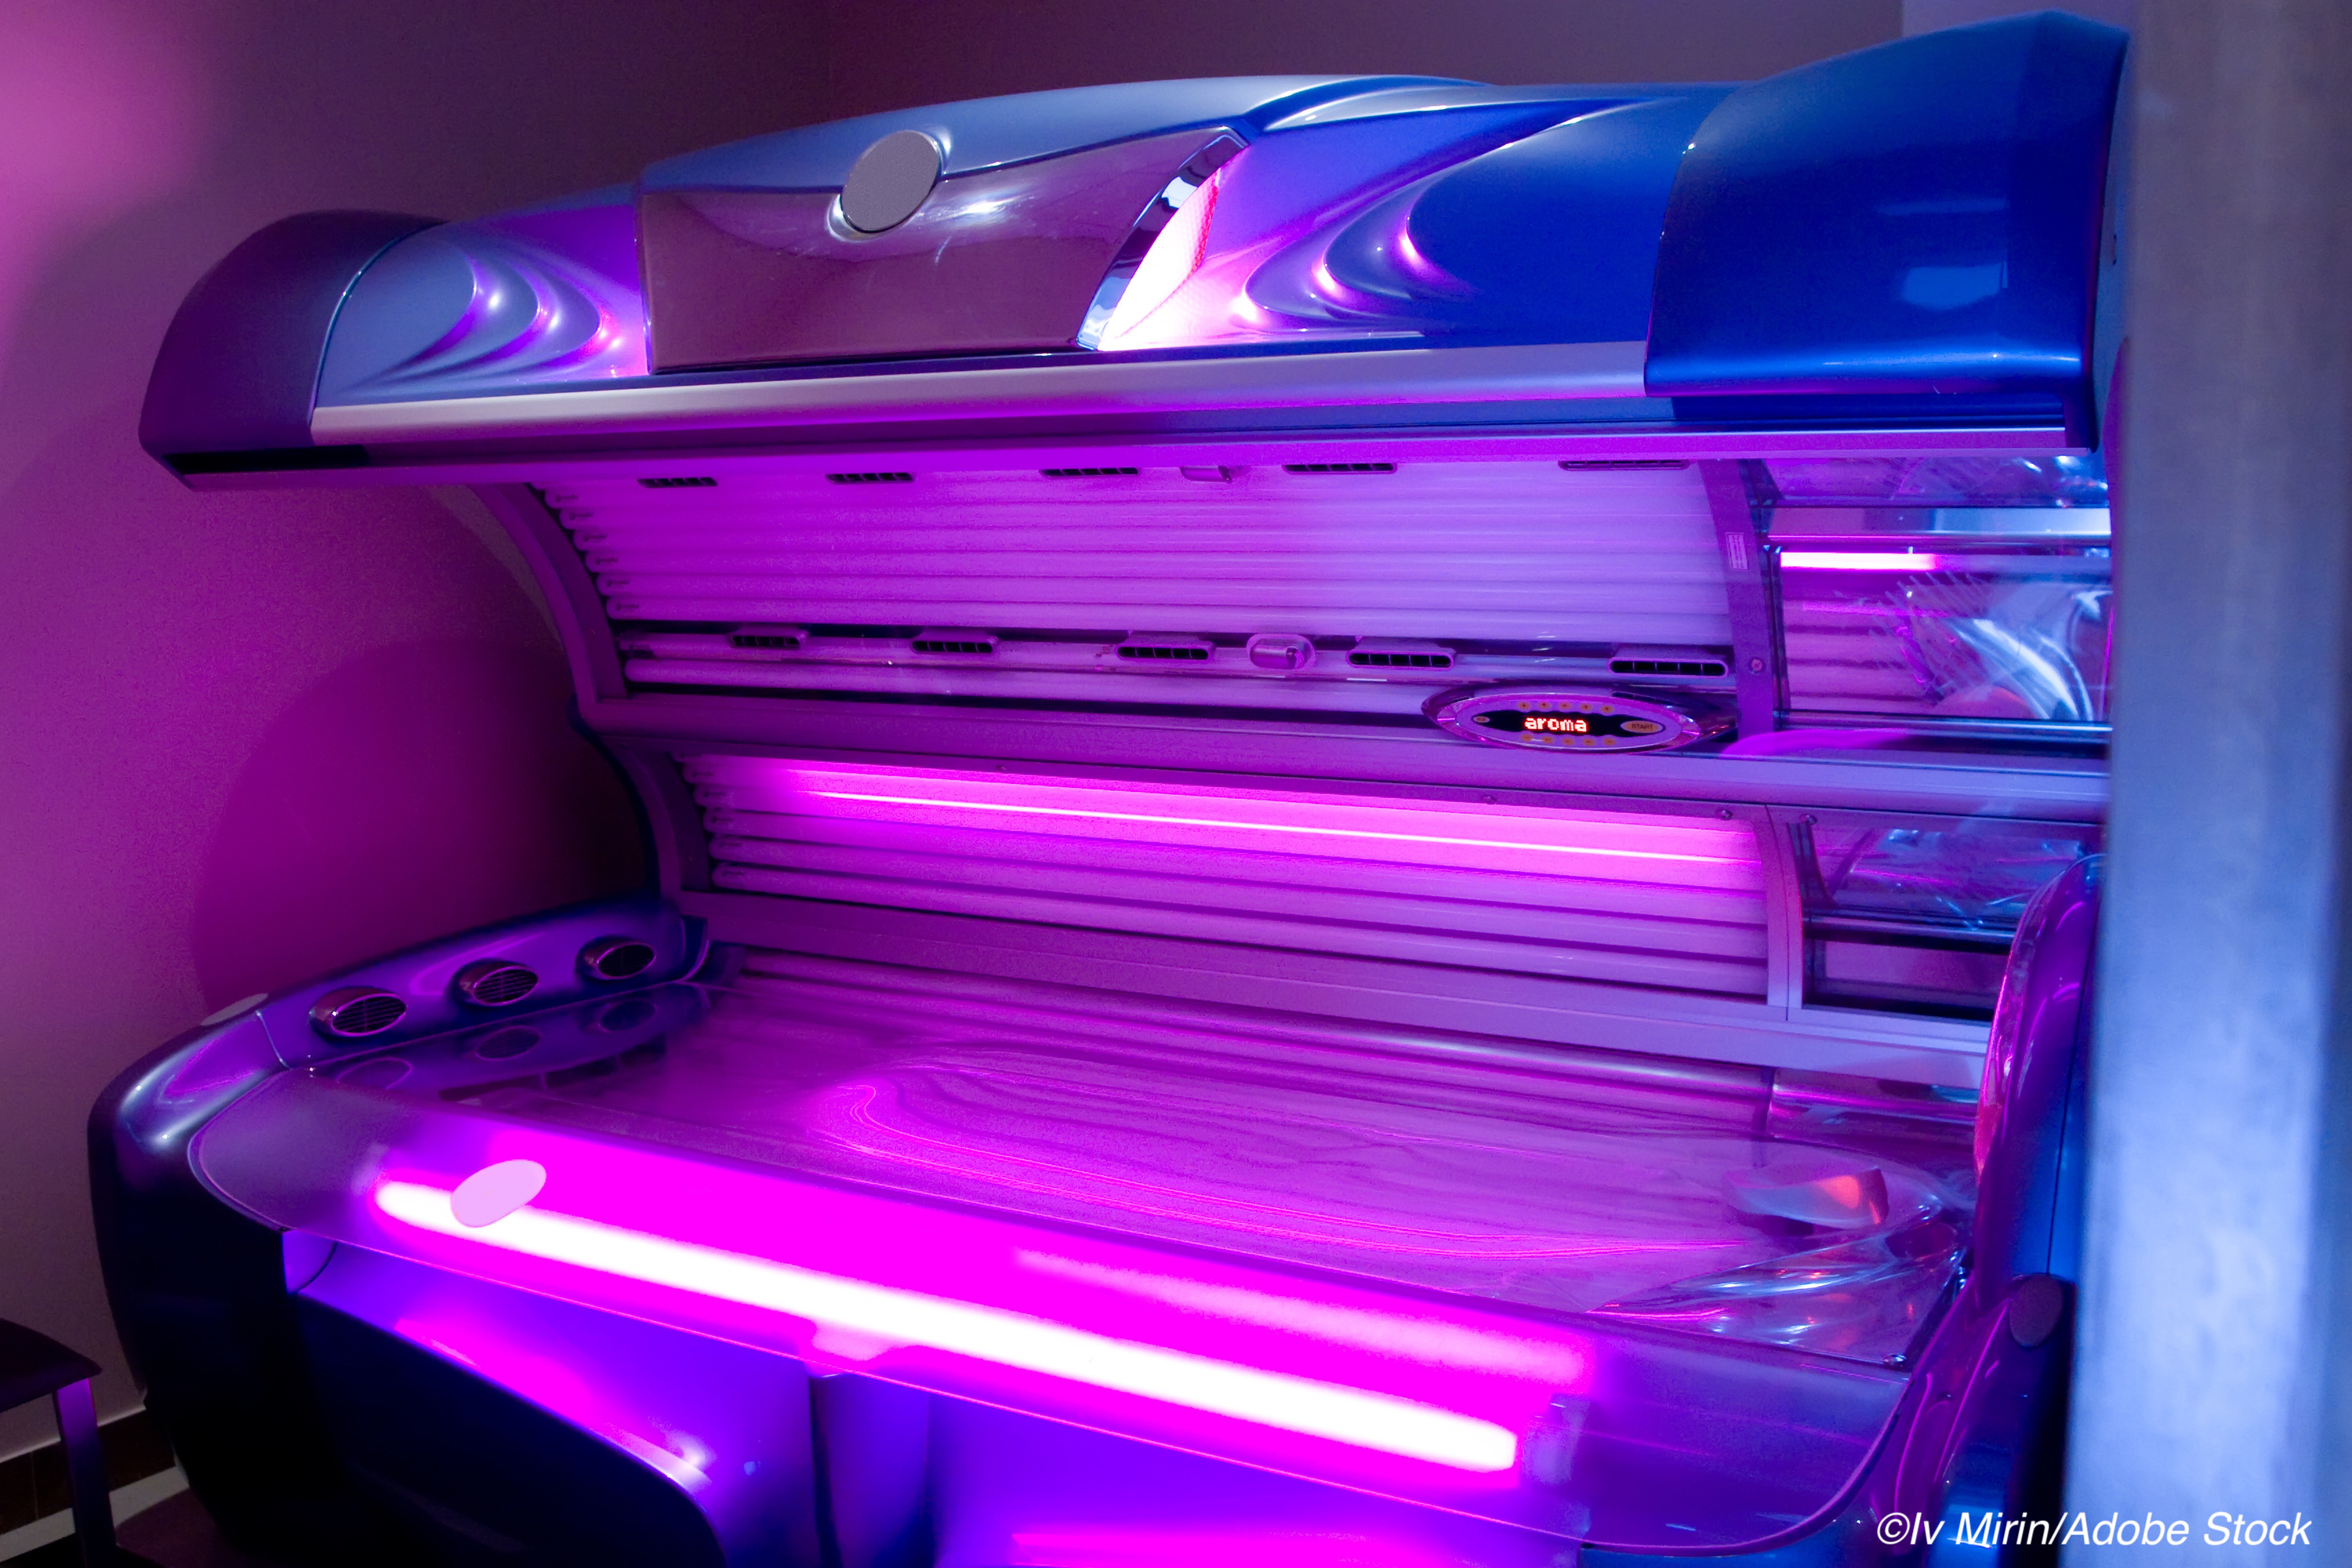 Banning Tanning Beds for Teens Cuts Cancer, Costs